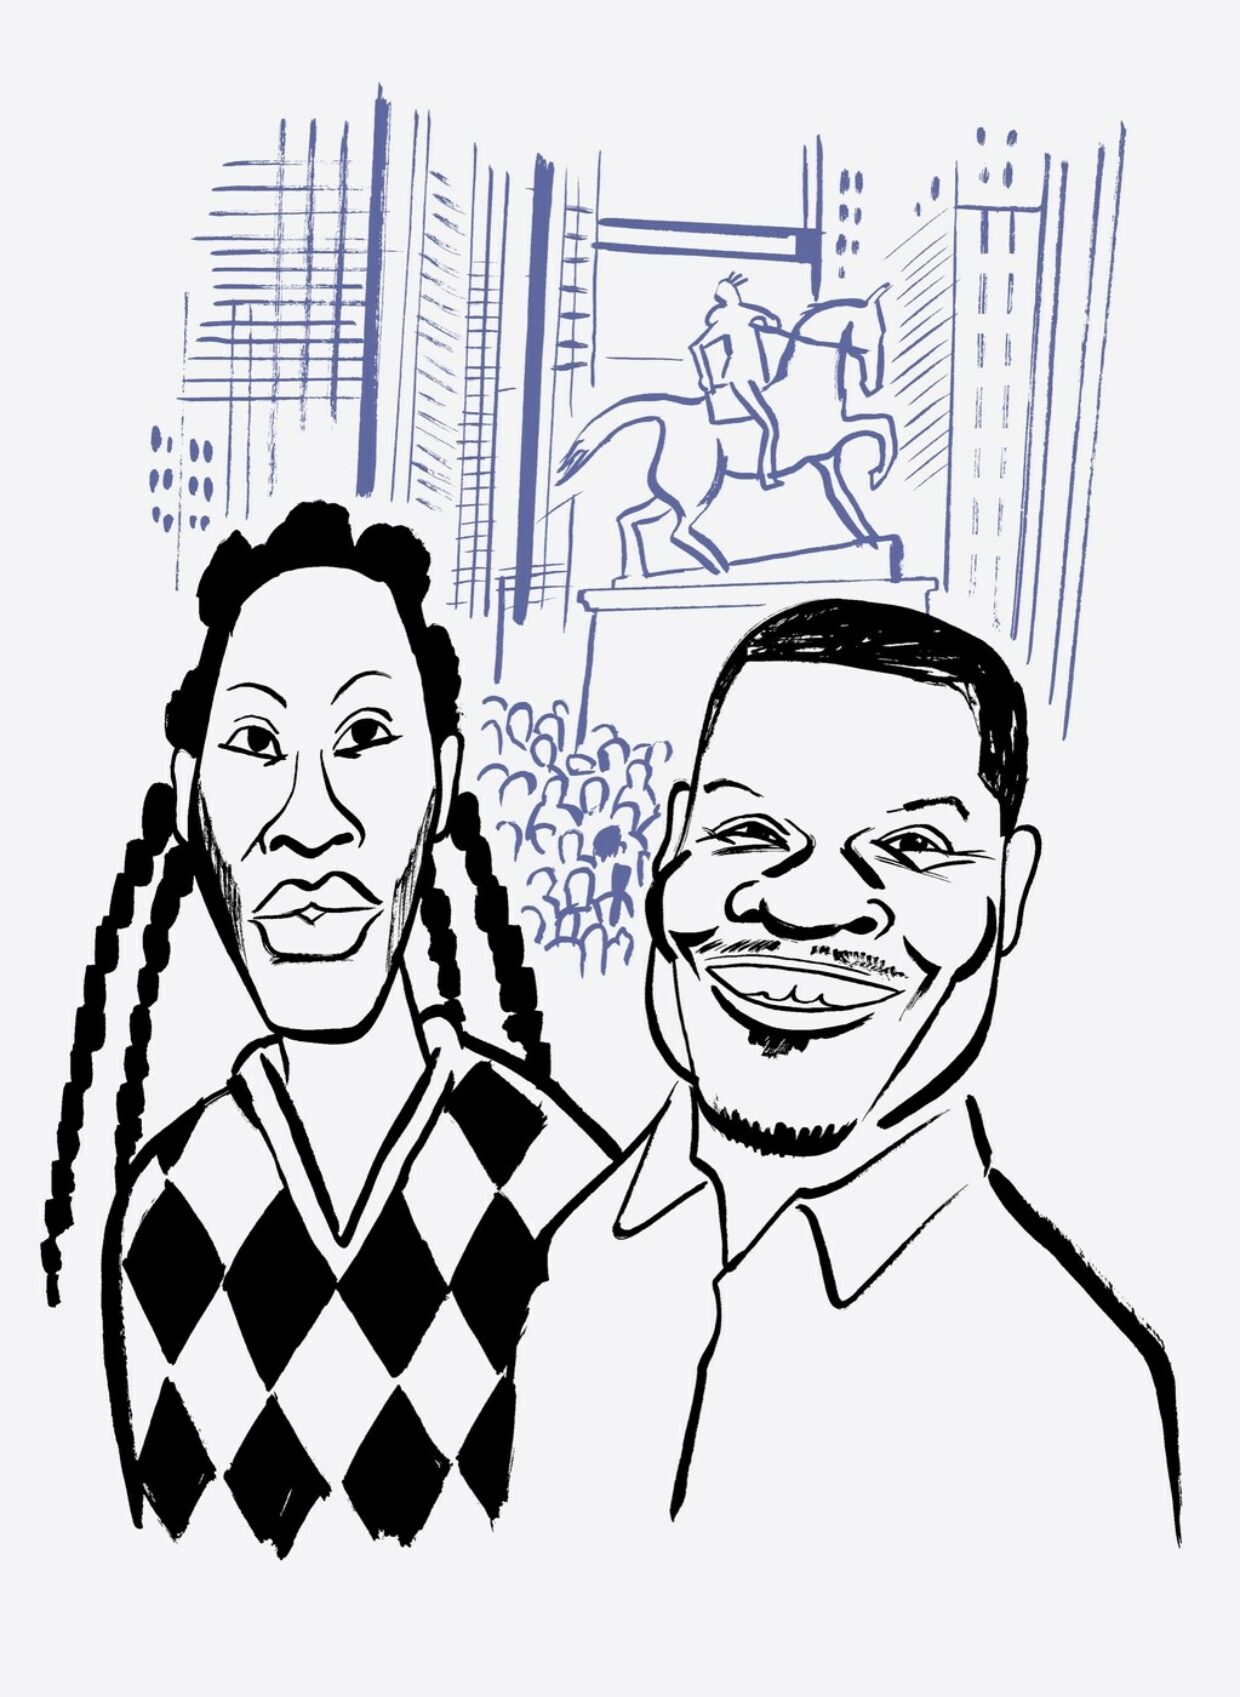 Kehinde Wiley and Jeremy O. Harris’s Meeting of the Minds | Illustration by João Fazenda | 1